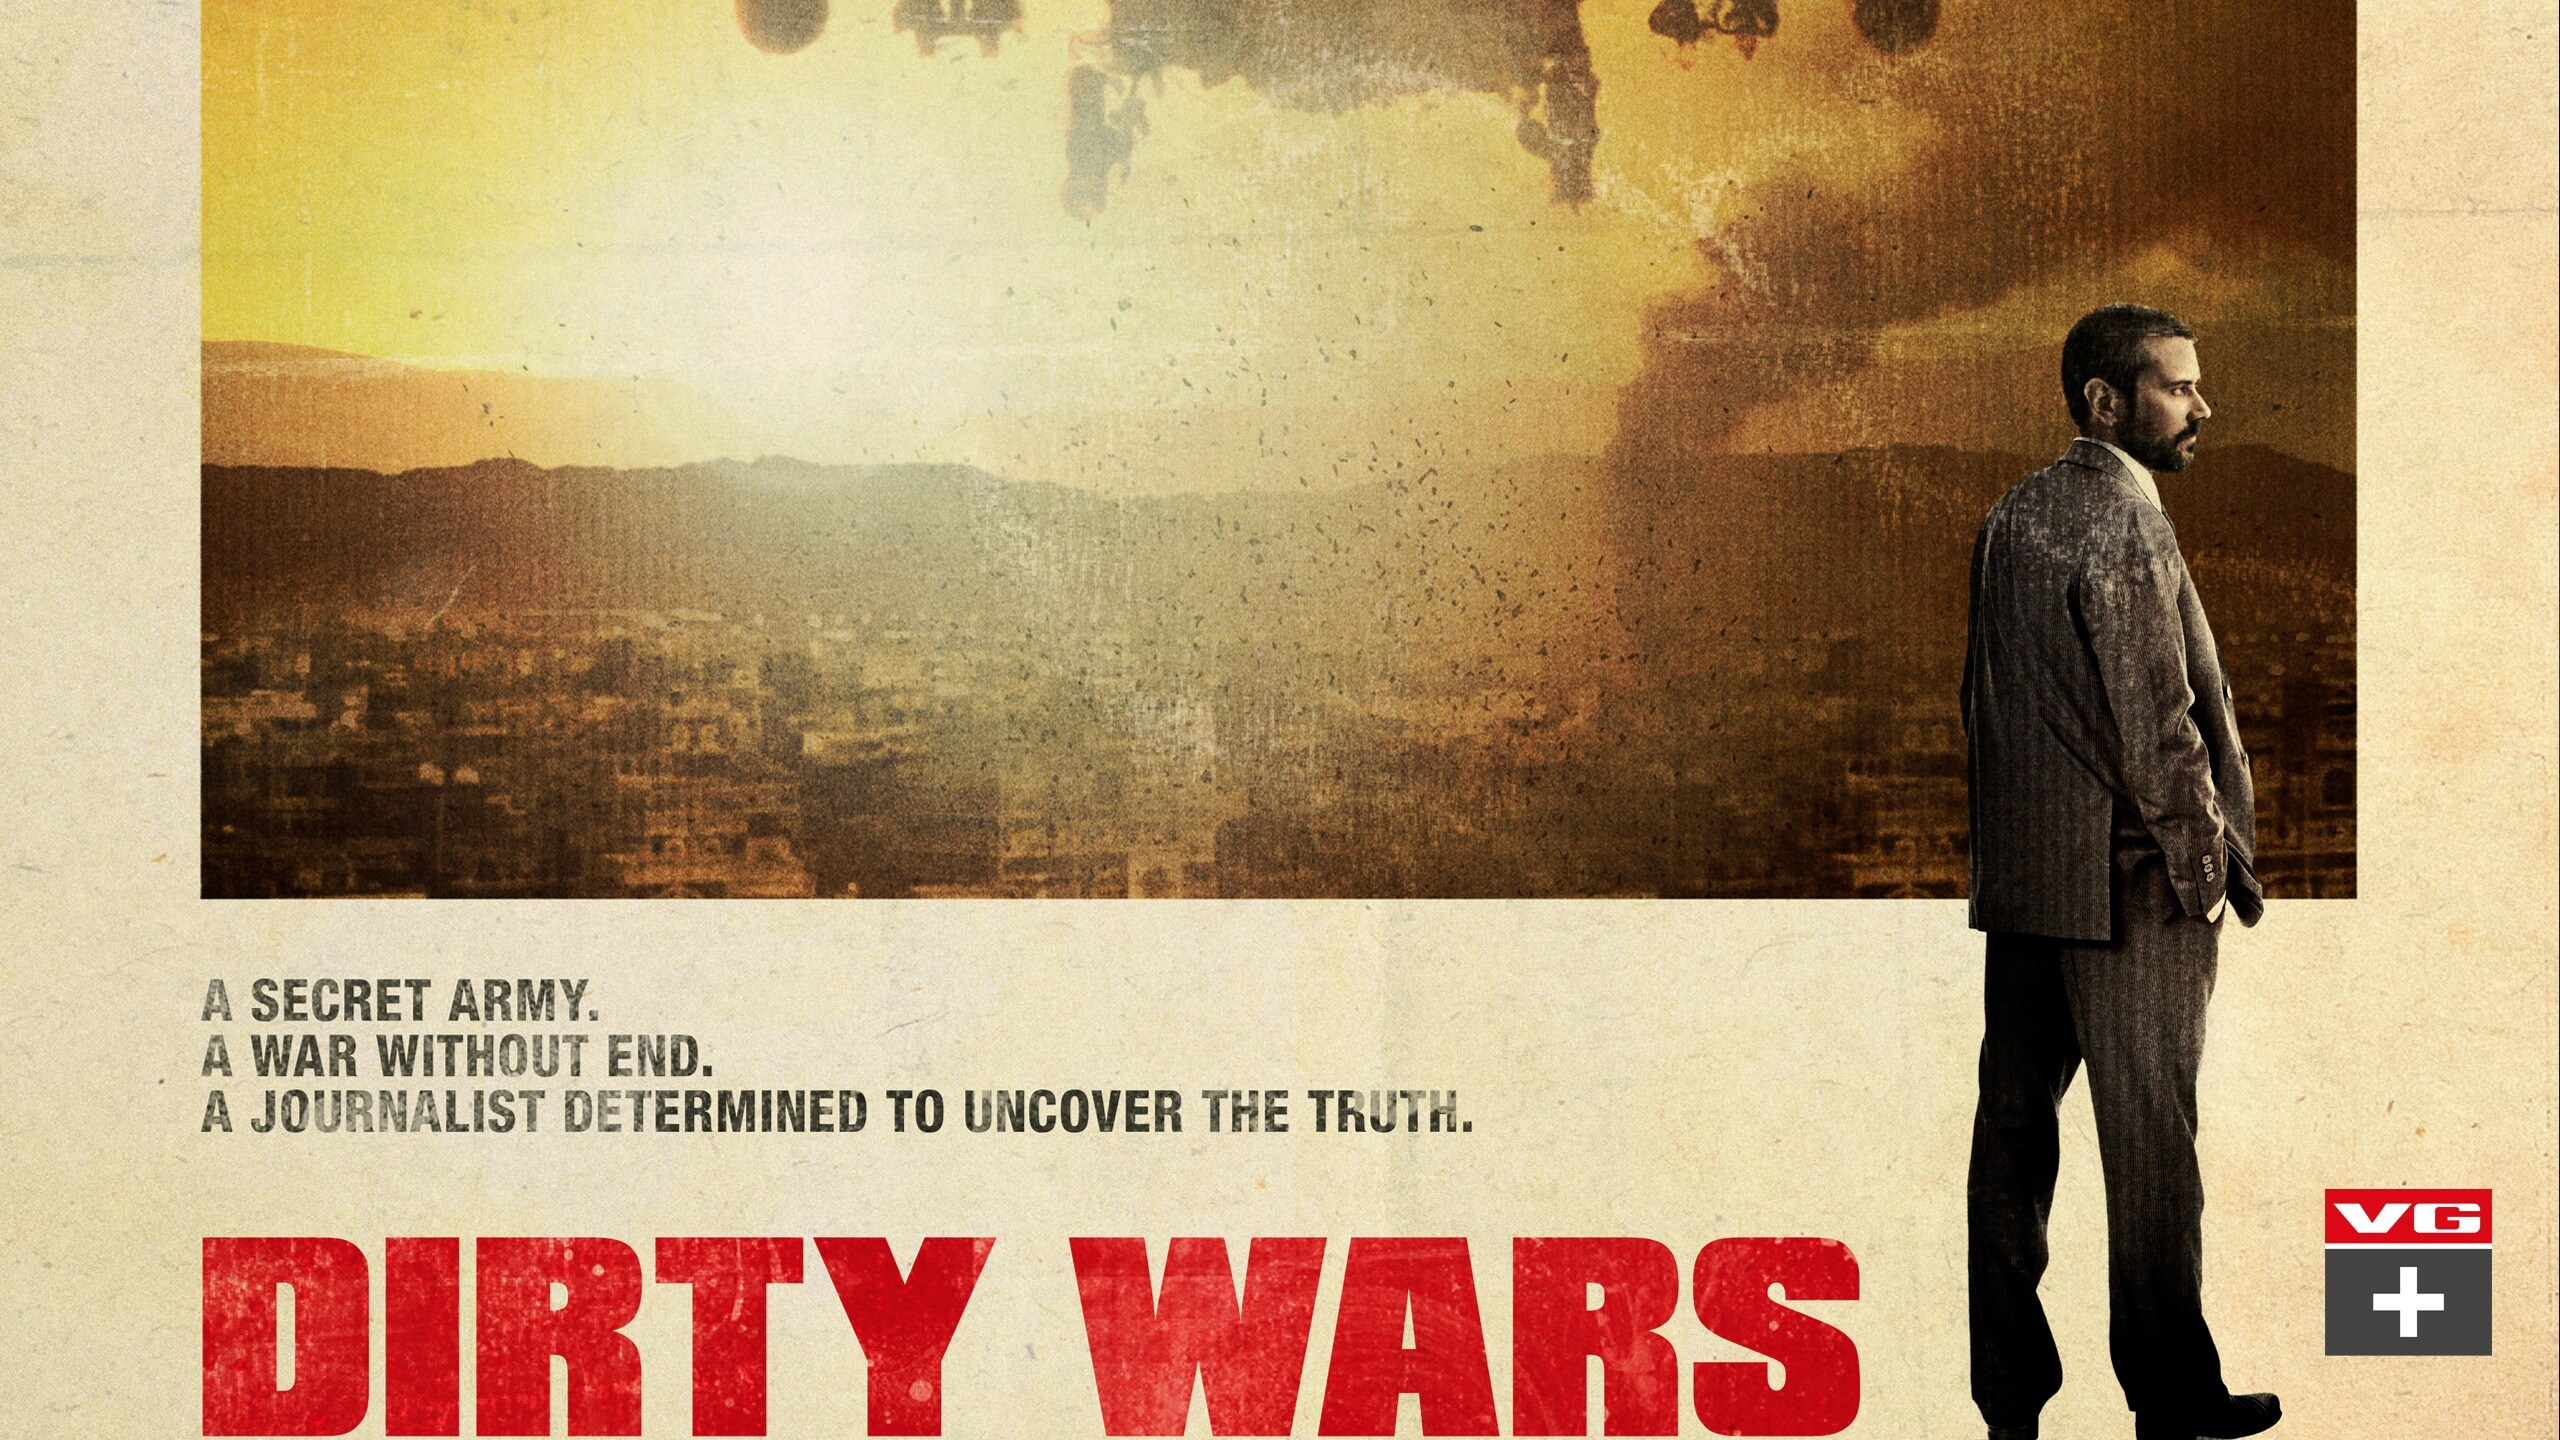 Dirty Wars 2013. Uncover Wars. Without wars